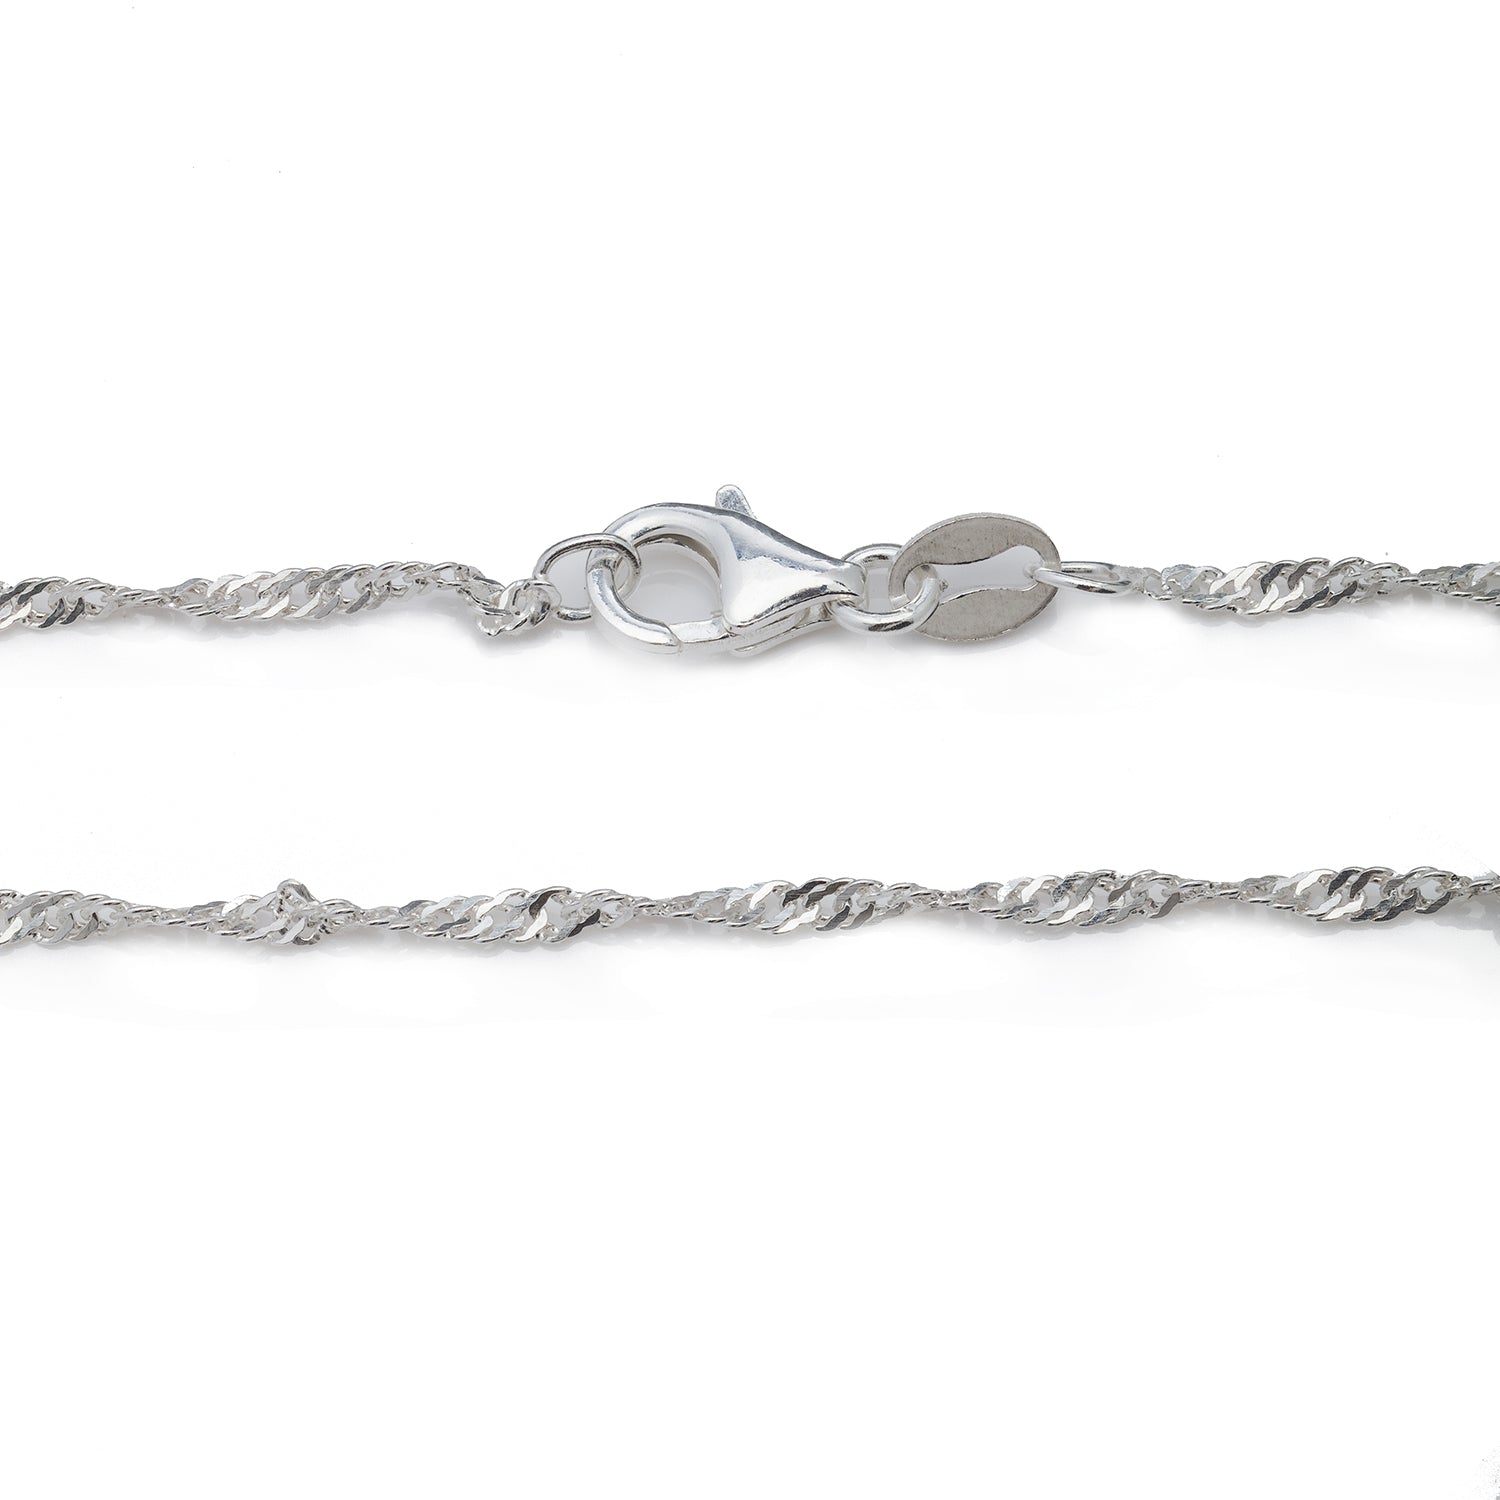 1.2MM Sterling Silver Singapore Chain with Lobster Claw Clasp. The singapore is a very shiny chain, perfect with or without a pendant.